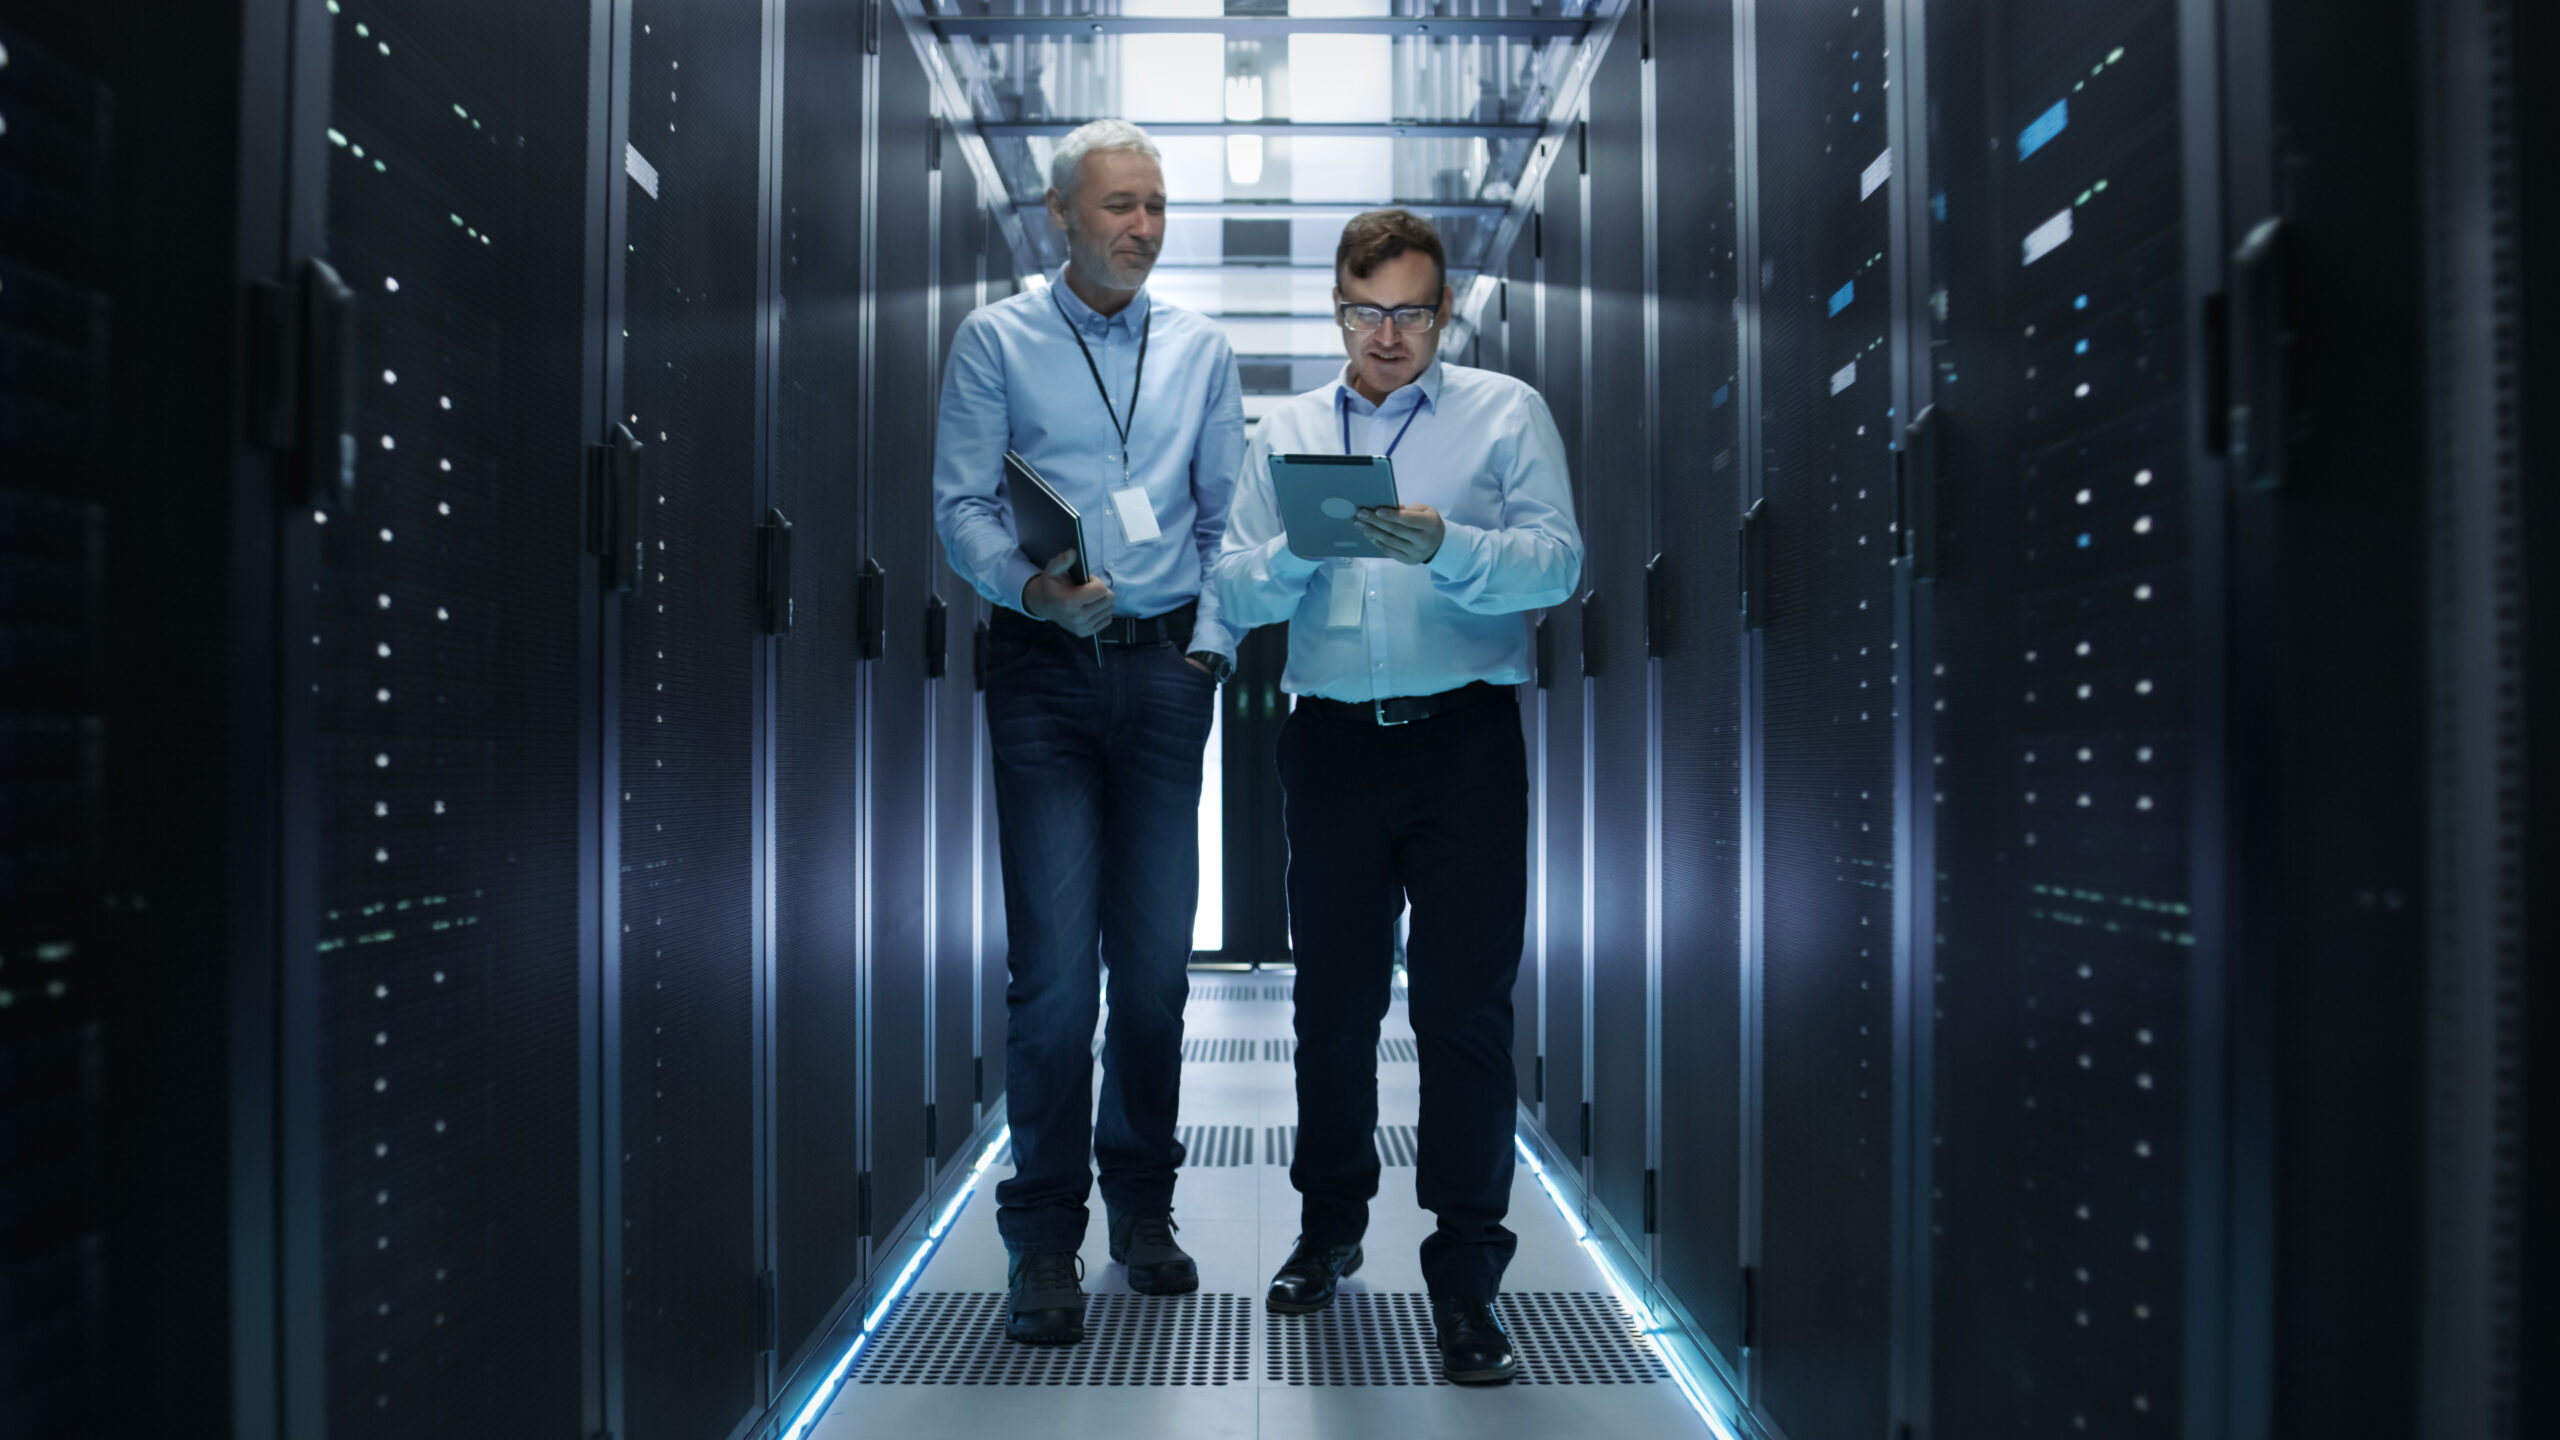 two men talking about IT infrastructure while walking through an IT server room